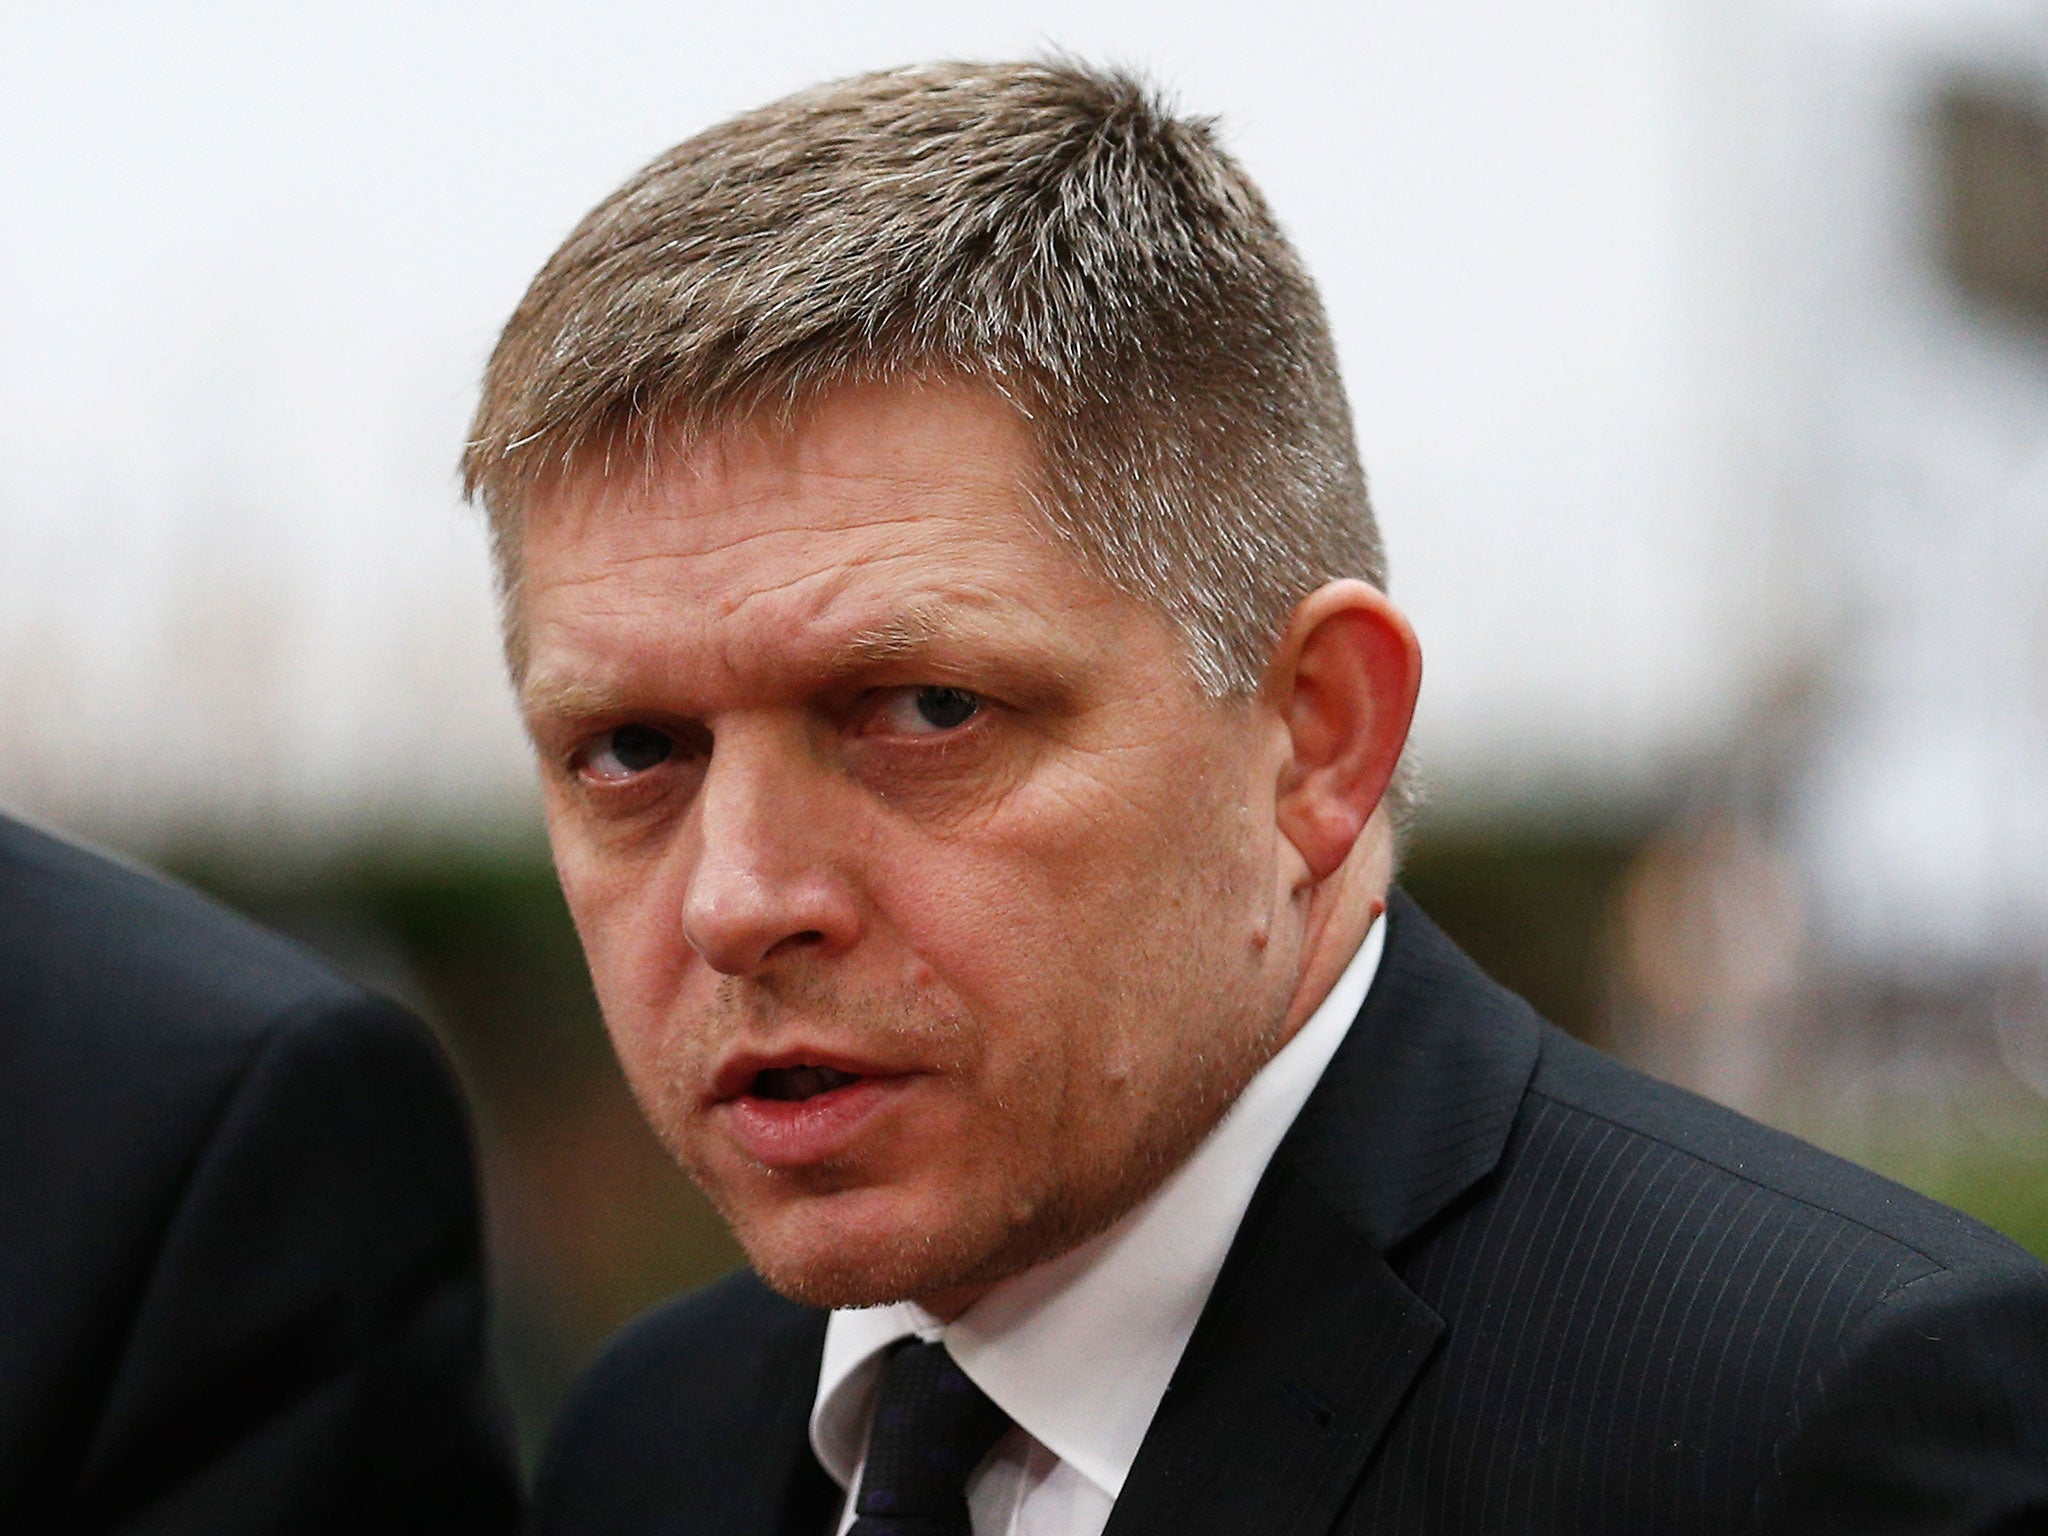 Slovakian Prime Minister Robert Fico has expressed hard-line views on migration